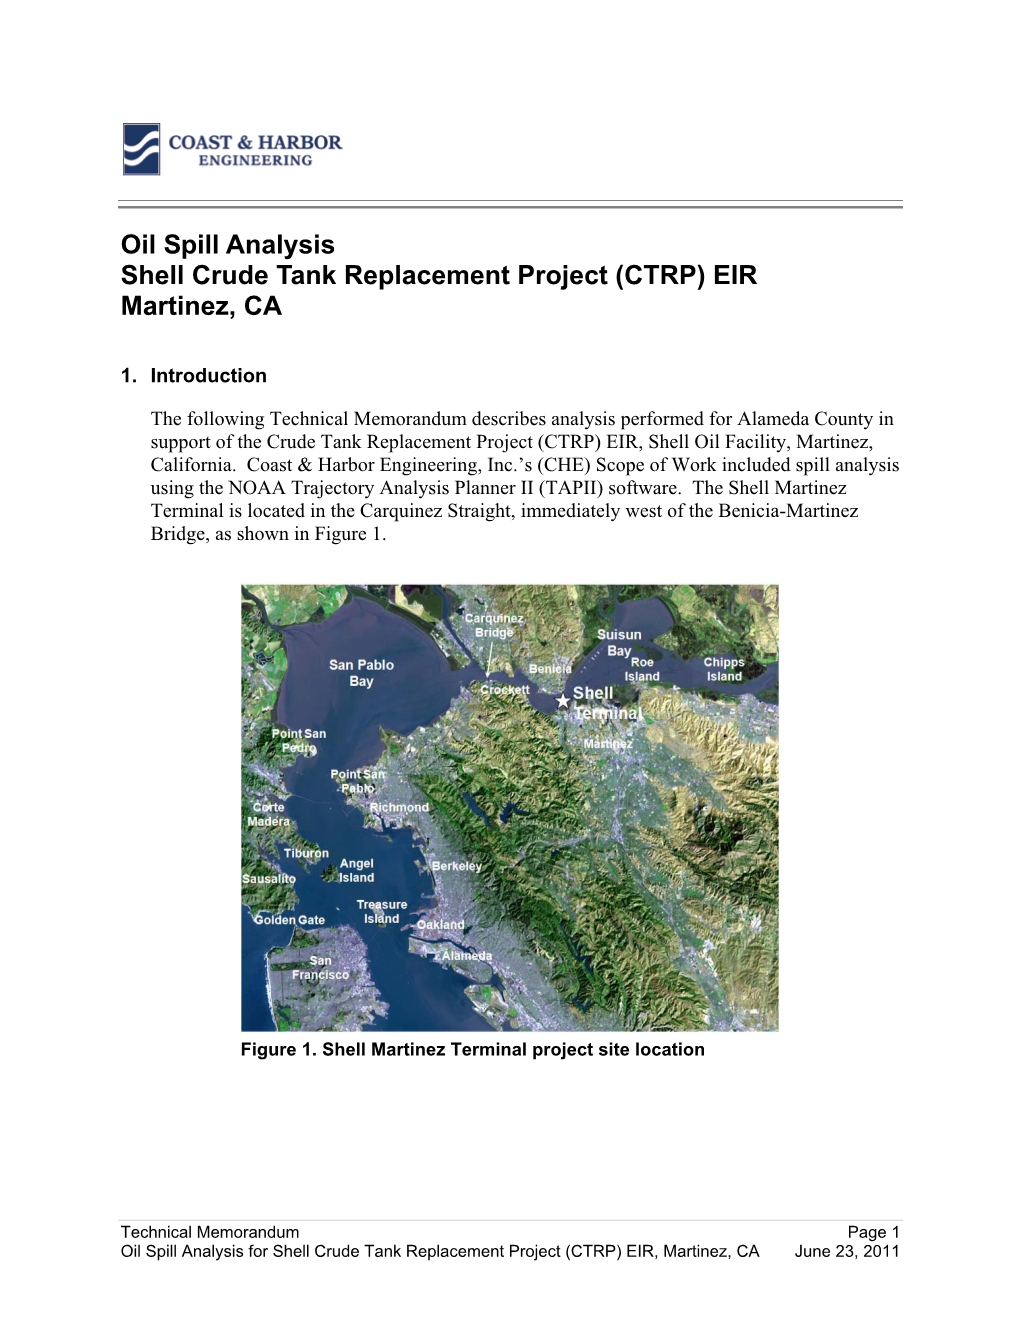 Oil Spill Analysis Shell Crude Tank Replacement Project (CTRP) EIR Martinez, CA